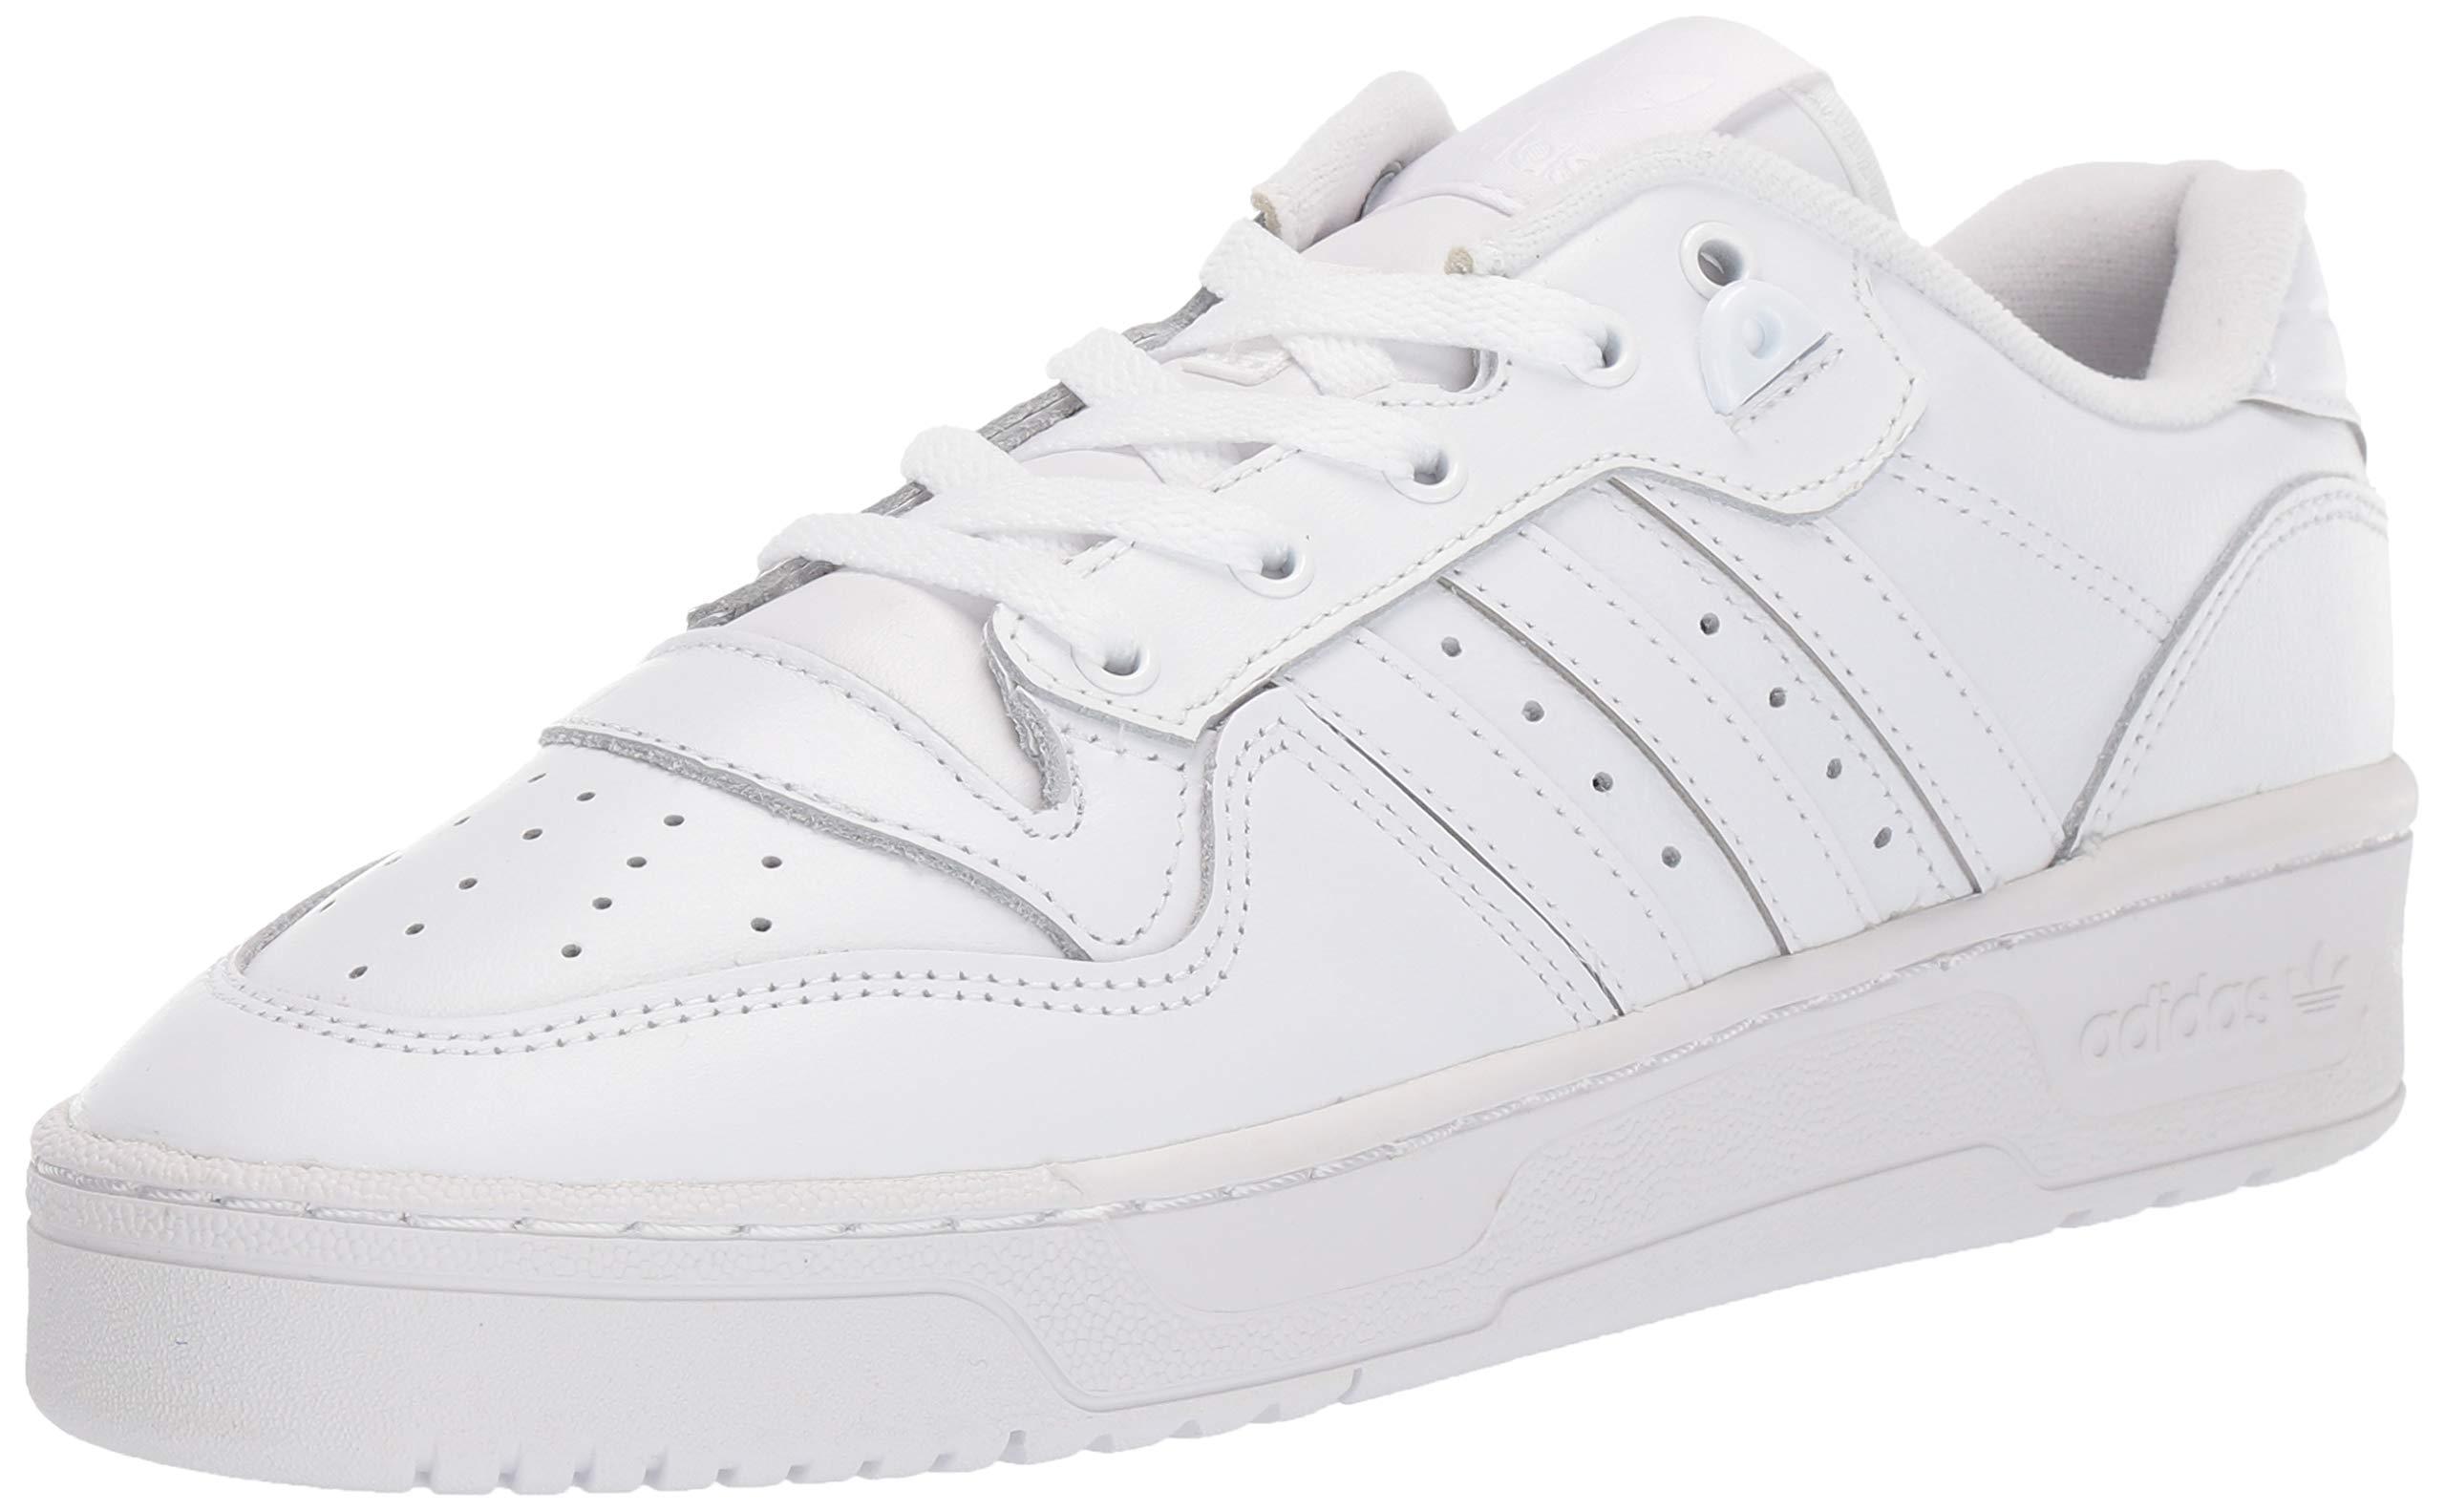 adidas Originals Leather Rivalry Low in White/White/Black (White) for Men -  Save 70% | Lyst